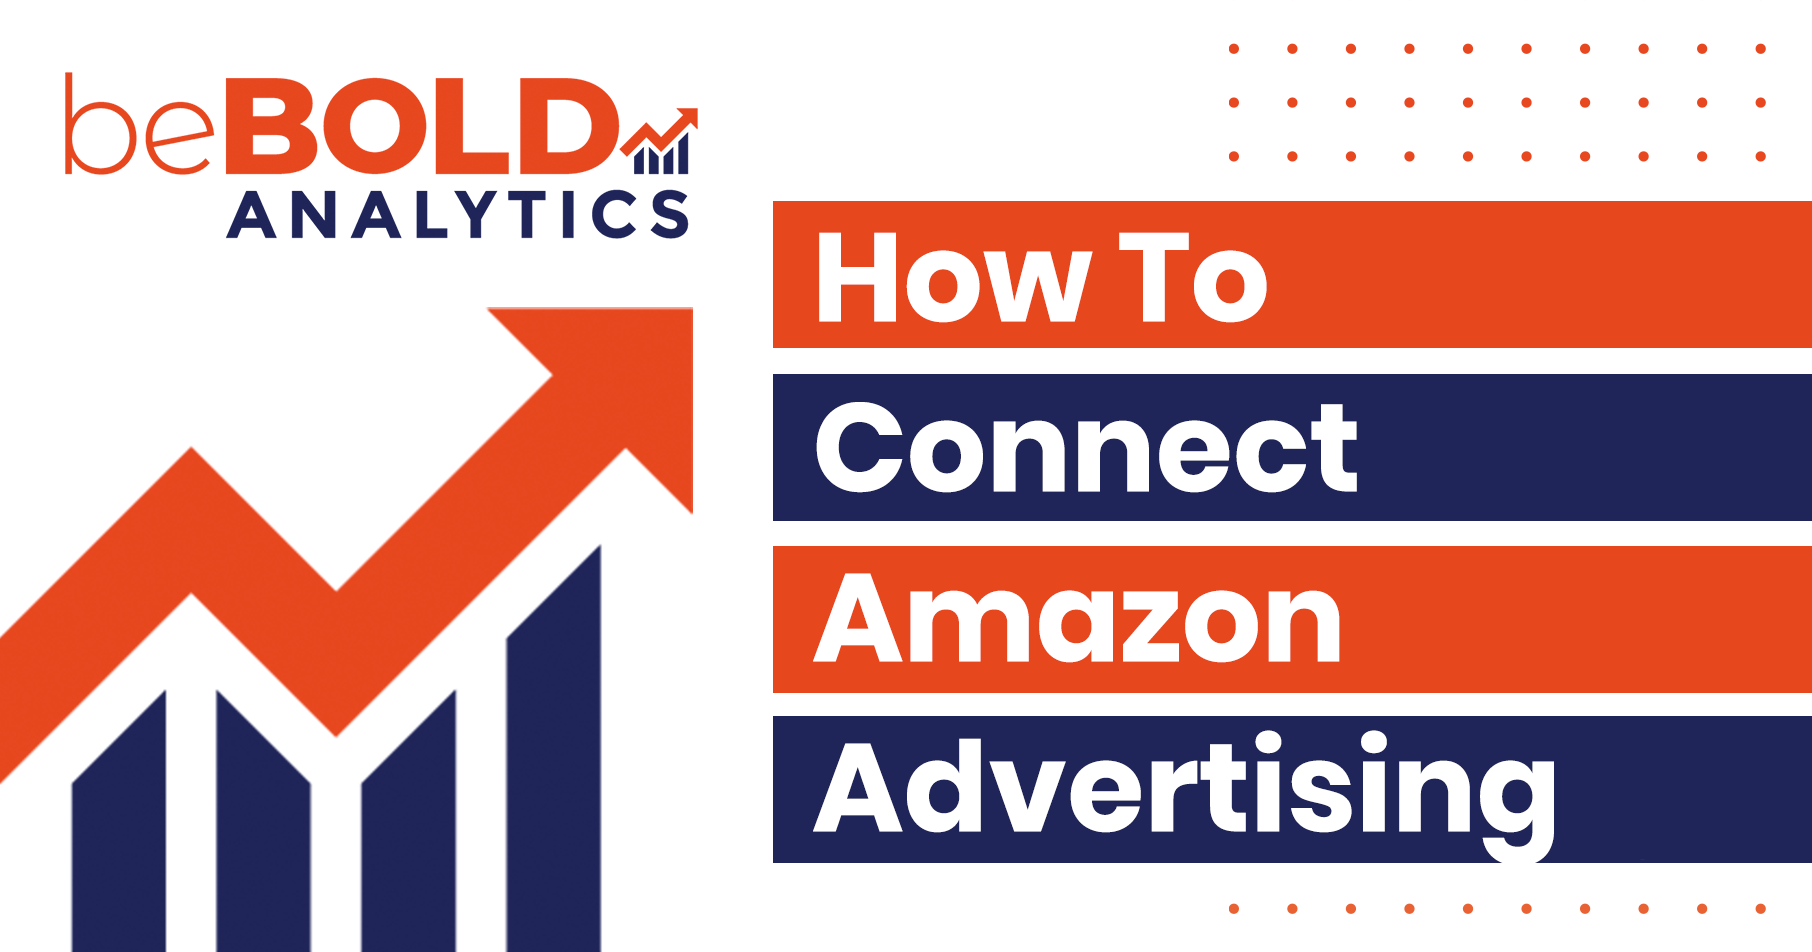 How to Connect your Amazon Advertising Account to beBOLD Analytics